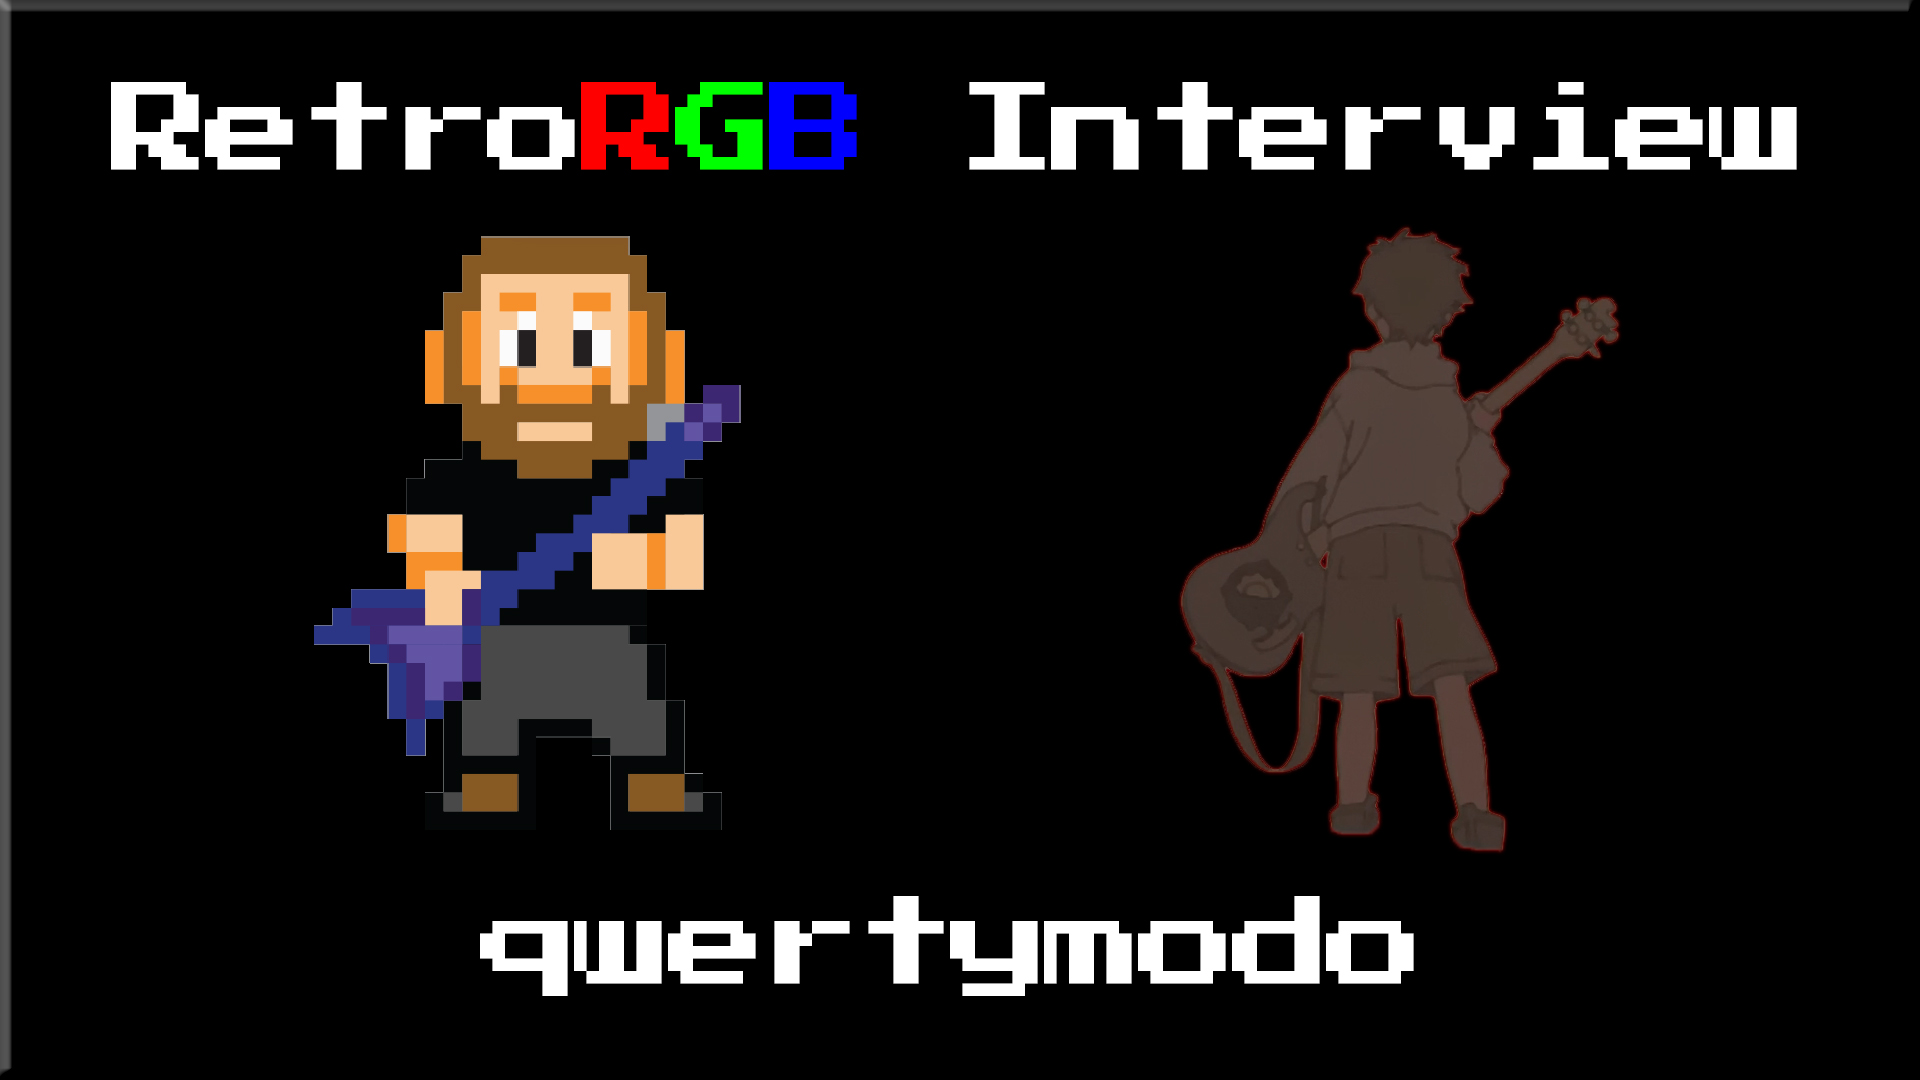 Interview with qwertymodo